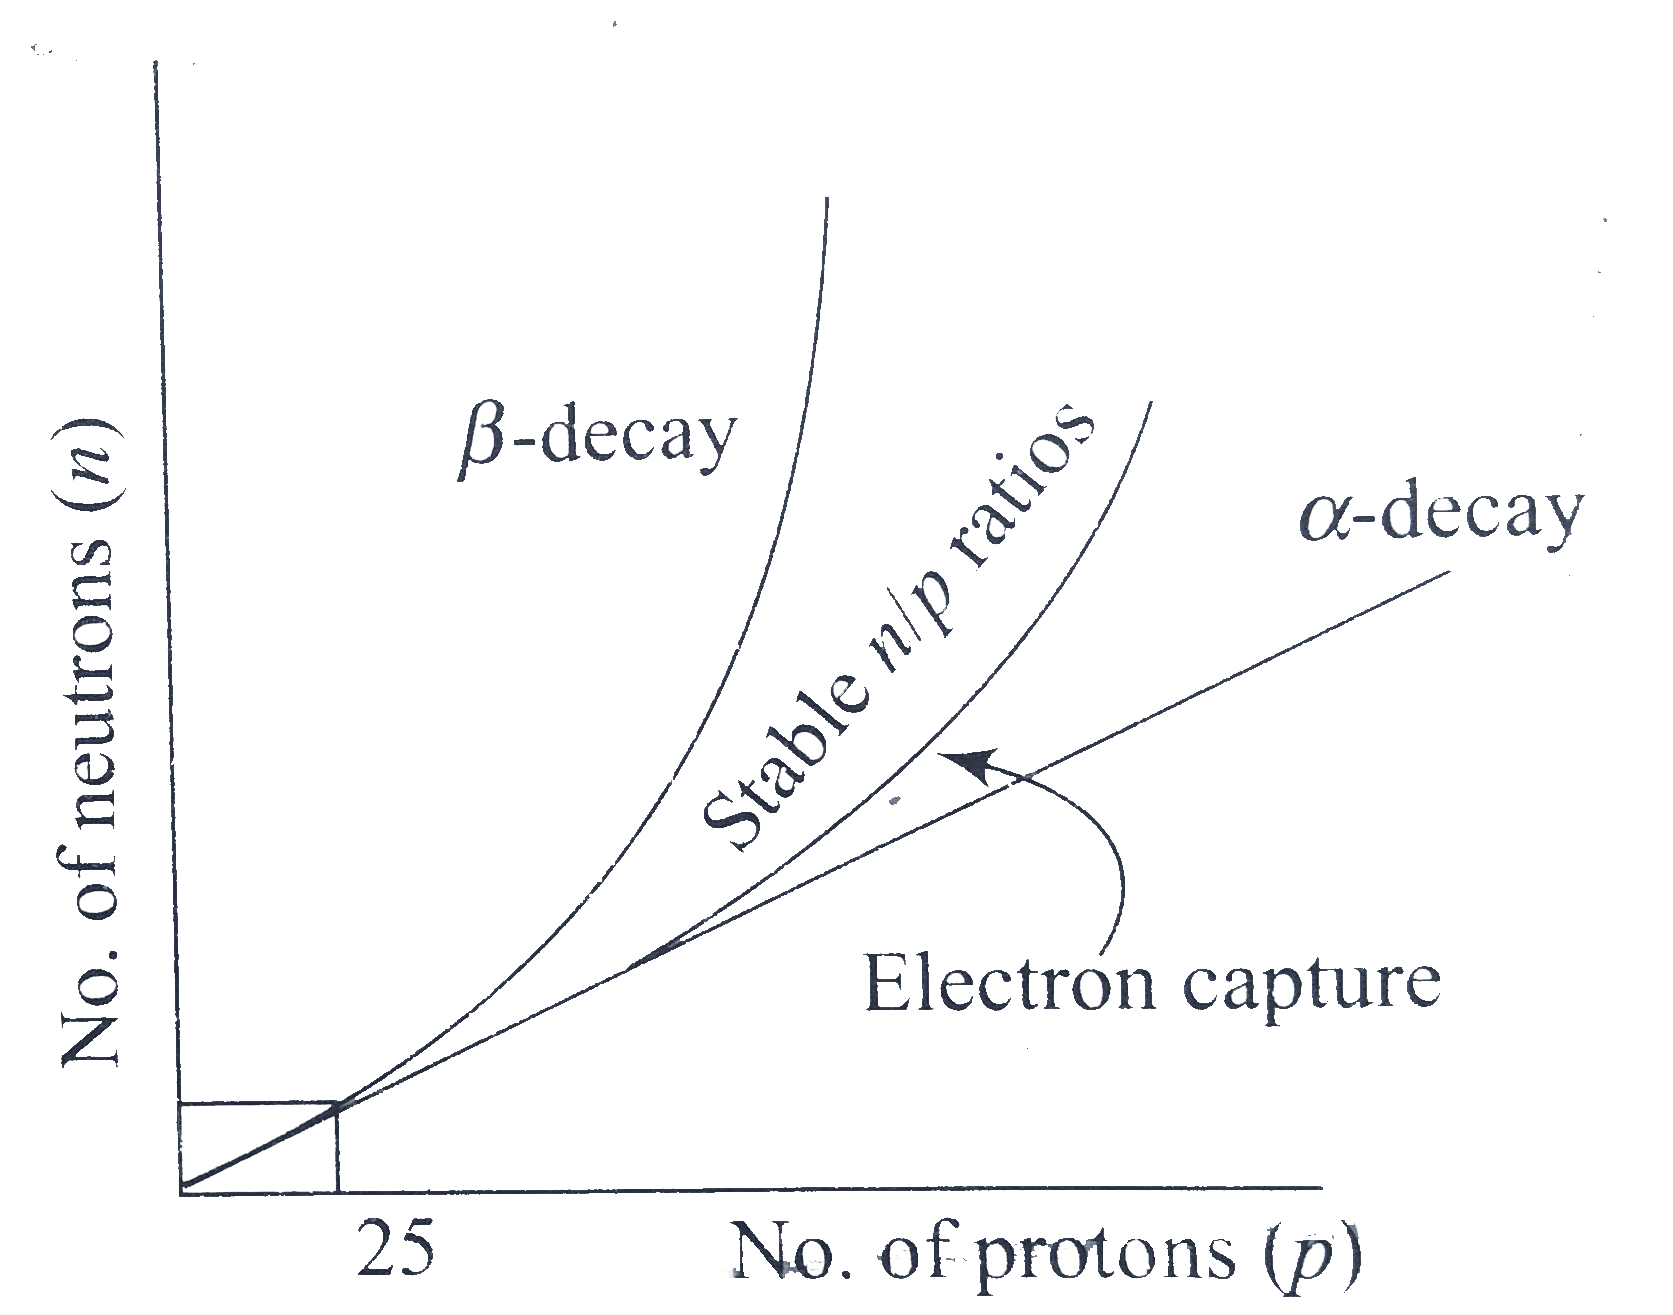 Various rules of thumb have seen proposed by the scientific community to expalin the mode of radioactive decay by various radioisotopes. One of the major rules is called the n//p ratio. If all the known isotopes of the elemnts are plotted on a graph of number of neutrons (n) versus number of protons (p), it is observed that all isotopes lying outside of a ''stable'' n//p ratio region are radioactive as shown fig.5.28. The graph exhibits straight line behaviour with unit slope up to p=25. Above p=25, tgose isotopes with n//p ratios lying above the stable region usually undergo beta decay. Very heavy isotopes (pgt83) are unstable because of their relativley large nuclei and they undergo alpha decay. Gamma ray emission does not involve the release of a particle. It represnts a change in an atom from a higher energy level to a lower energy level.       Which of the following represents the relative penetrating power of the three types of radioactive emission in decreasing order?